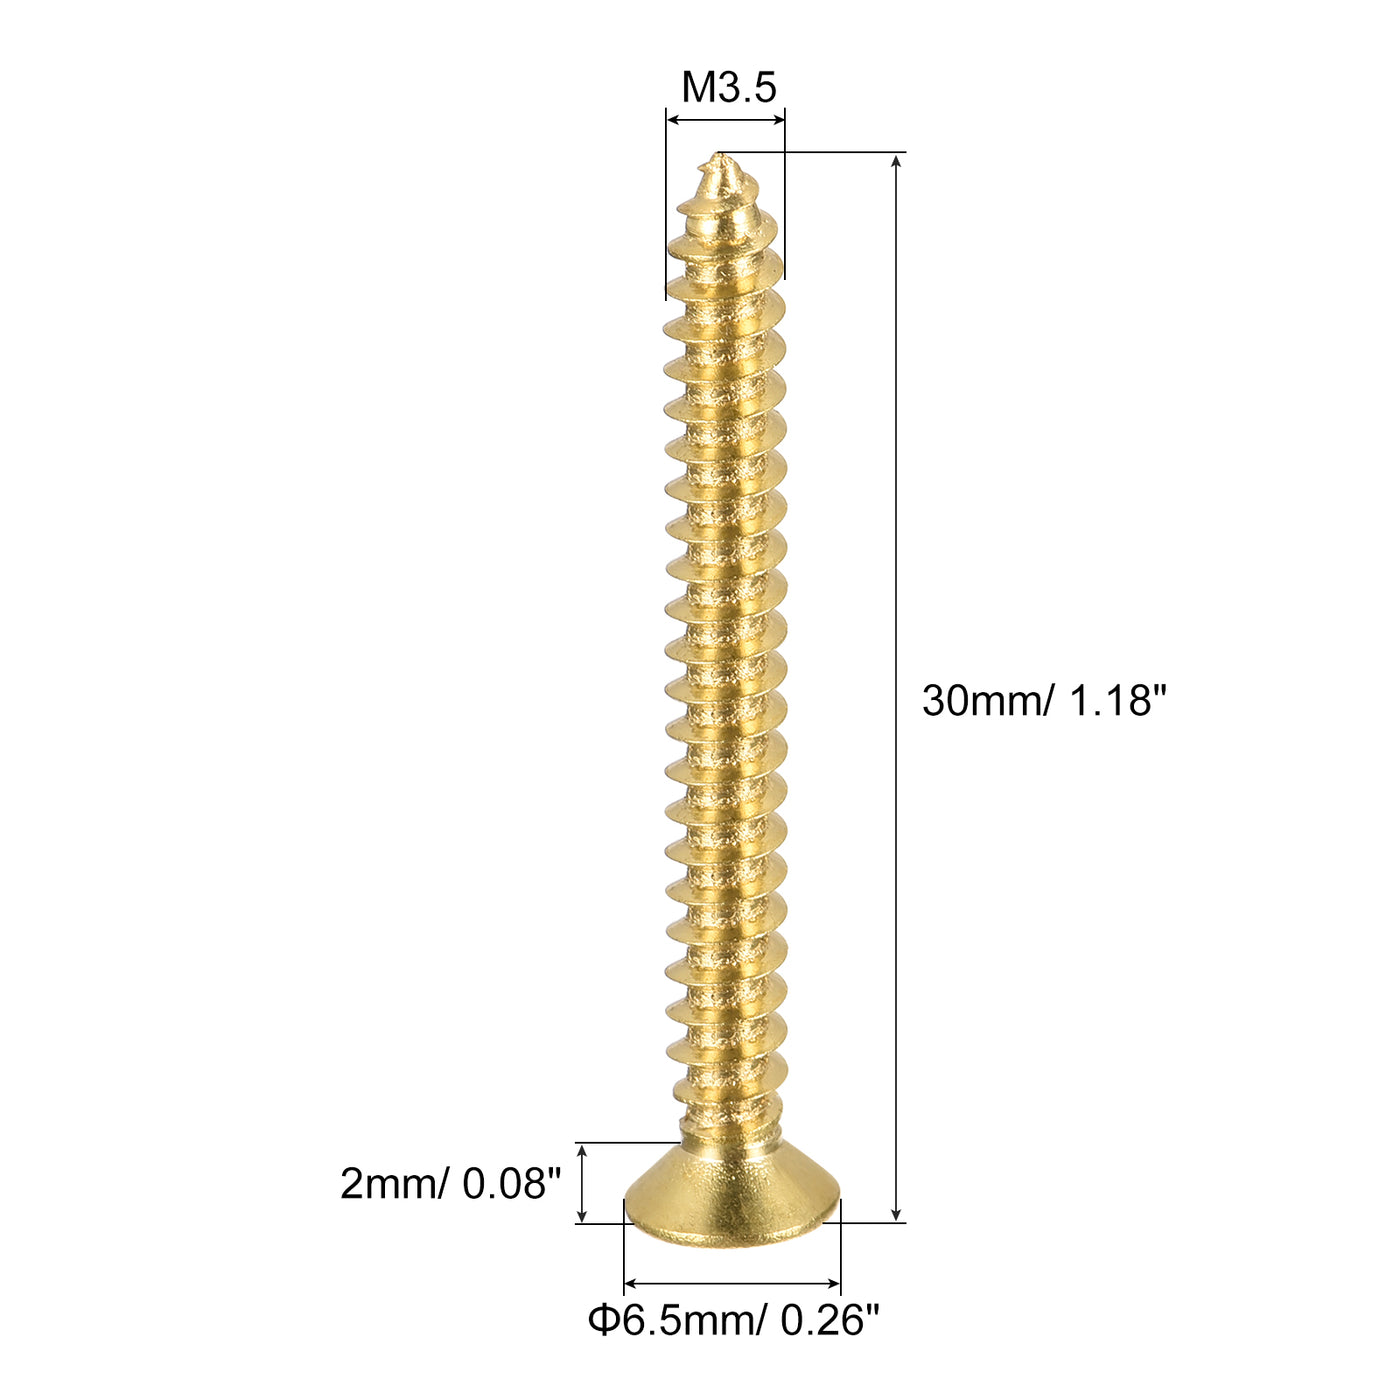 uxcell Uxcell Brass Wood Screws, M3.5x30mm Phillips Flat Head Self Tapping Connector for Door, Cabinet, Wooden Furniture 15Pcs